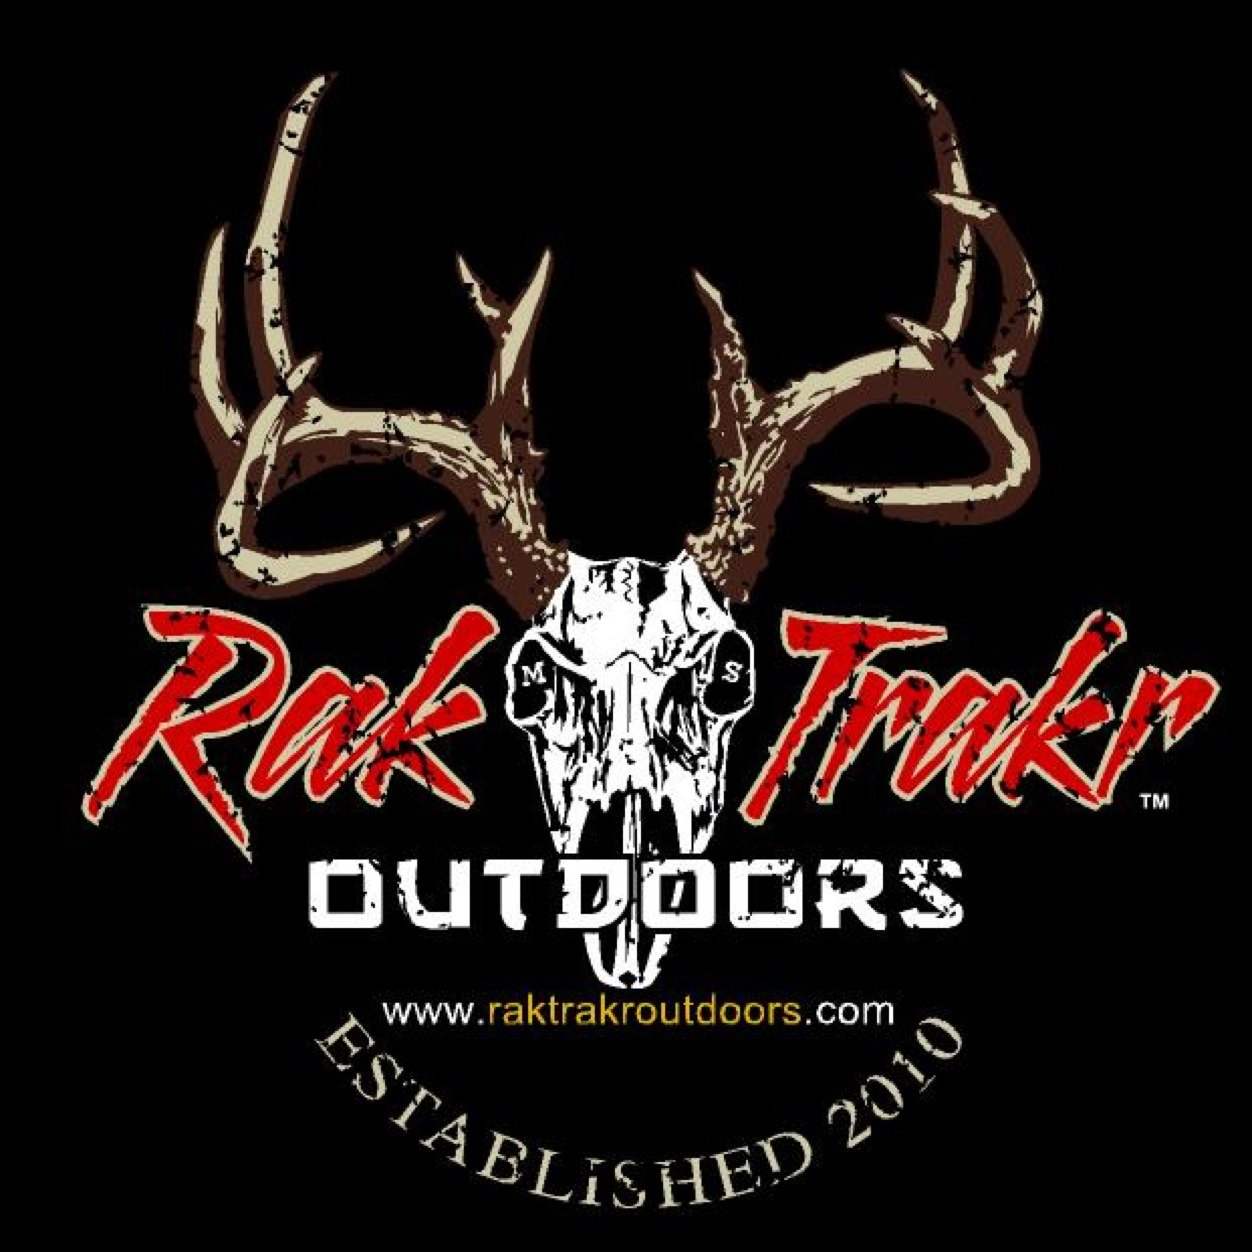 Our mission is offer the absolute best in whitetail minerals, attractants w/minerals and become Kentuckys #1 leader in the hunting industry !! .......Rak on !!